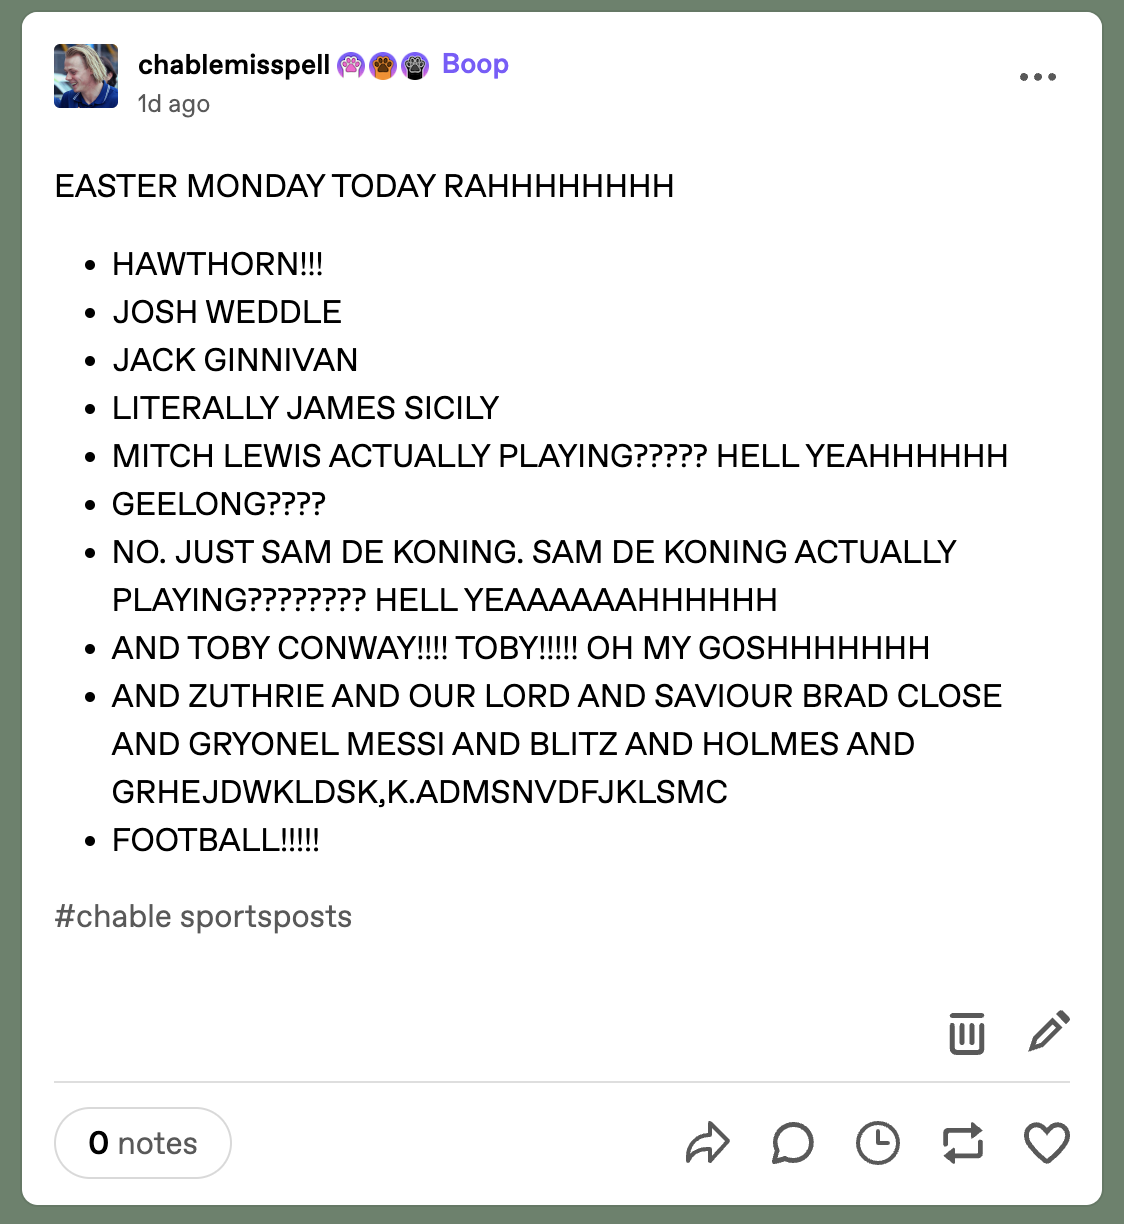 A post by Tumblr user @chablemisspell with the heading “EASTER MONDAY TODAY RAHHHHHHHH”. Underneath the heading, a series of dotpoints read “HAWTHORN!!!”, “JOSH WEDDLE”, “JACK GINNIVAN”, “LITERALLY JAMES SICILY”, “MITCH LEWIS ACTUALLY PLAYING????? HELL YEAHHHHHH”, “GEELONG????”, “NO. JUST SAM DE KONING. SAM DE KONING ACTUALLY PLAYING???????? HELL YEAAAAAAHHHHHH”, “AND TOBY CONWAY!!!! TOBY!!!!! OH MY GOSHHHHHHH”, “AND ZUTHRIE AND OUR LORD AND SAVIOUR BRAD CLOSE AND GRYONEL MESSI AND BLITZ AND HOLMES AND GRHEJDWKLDSK,K.ADMSNVDFJKLSMC” and “FOOTBALL!!!!!”. The tag is “chable sportsposts”.